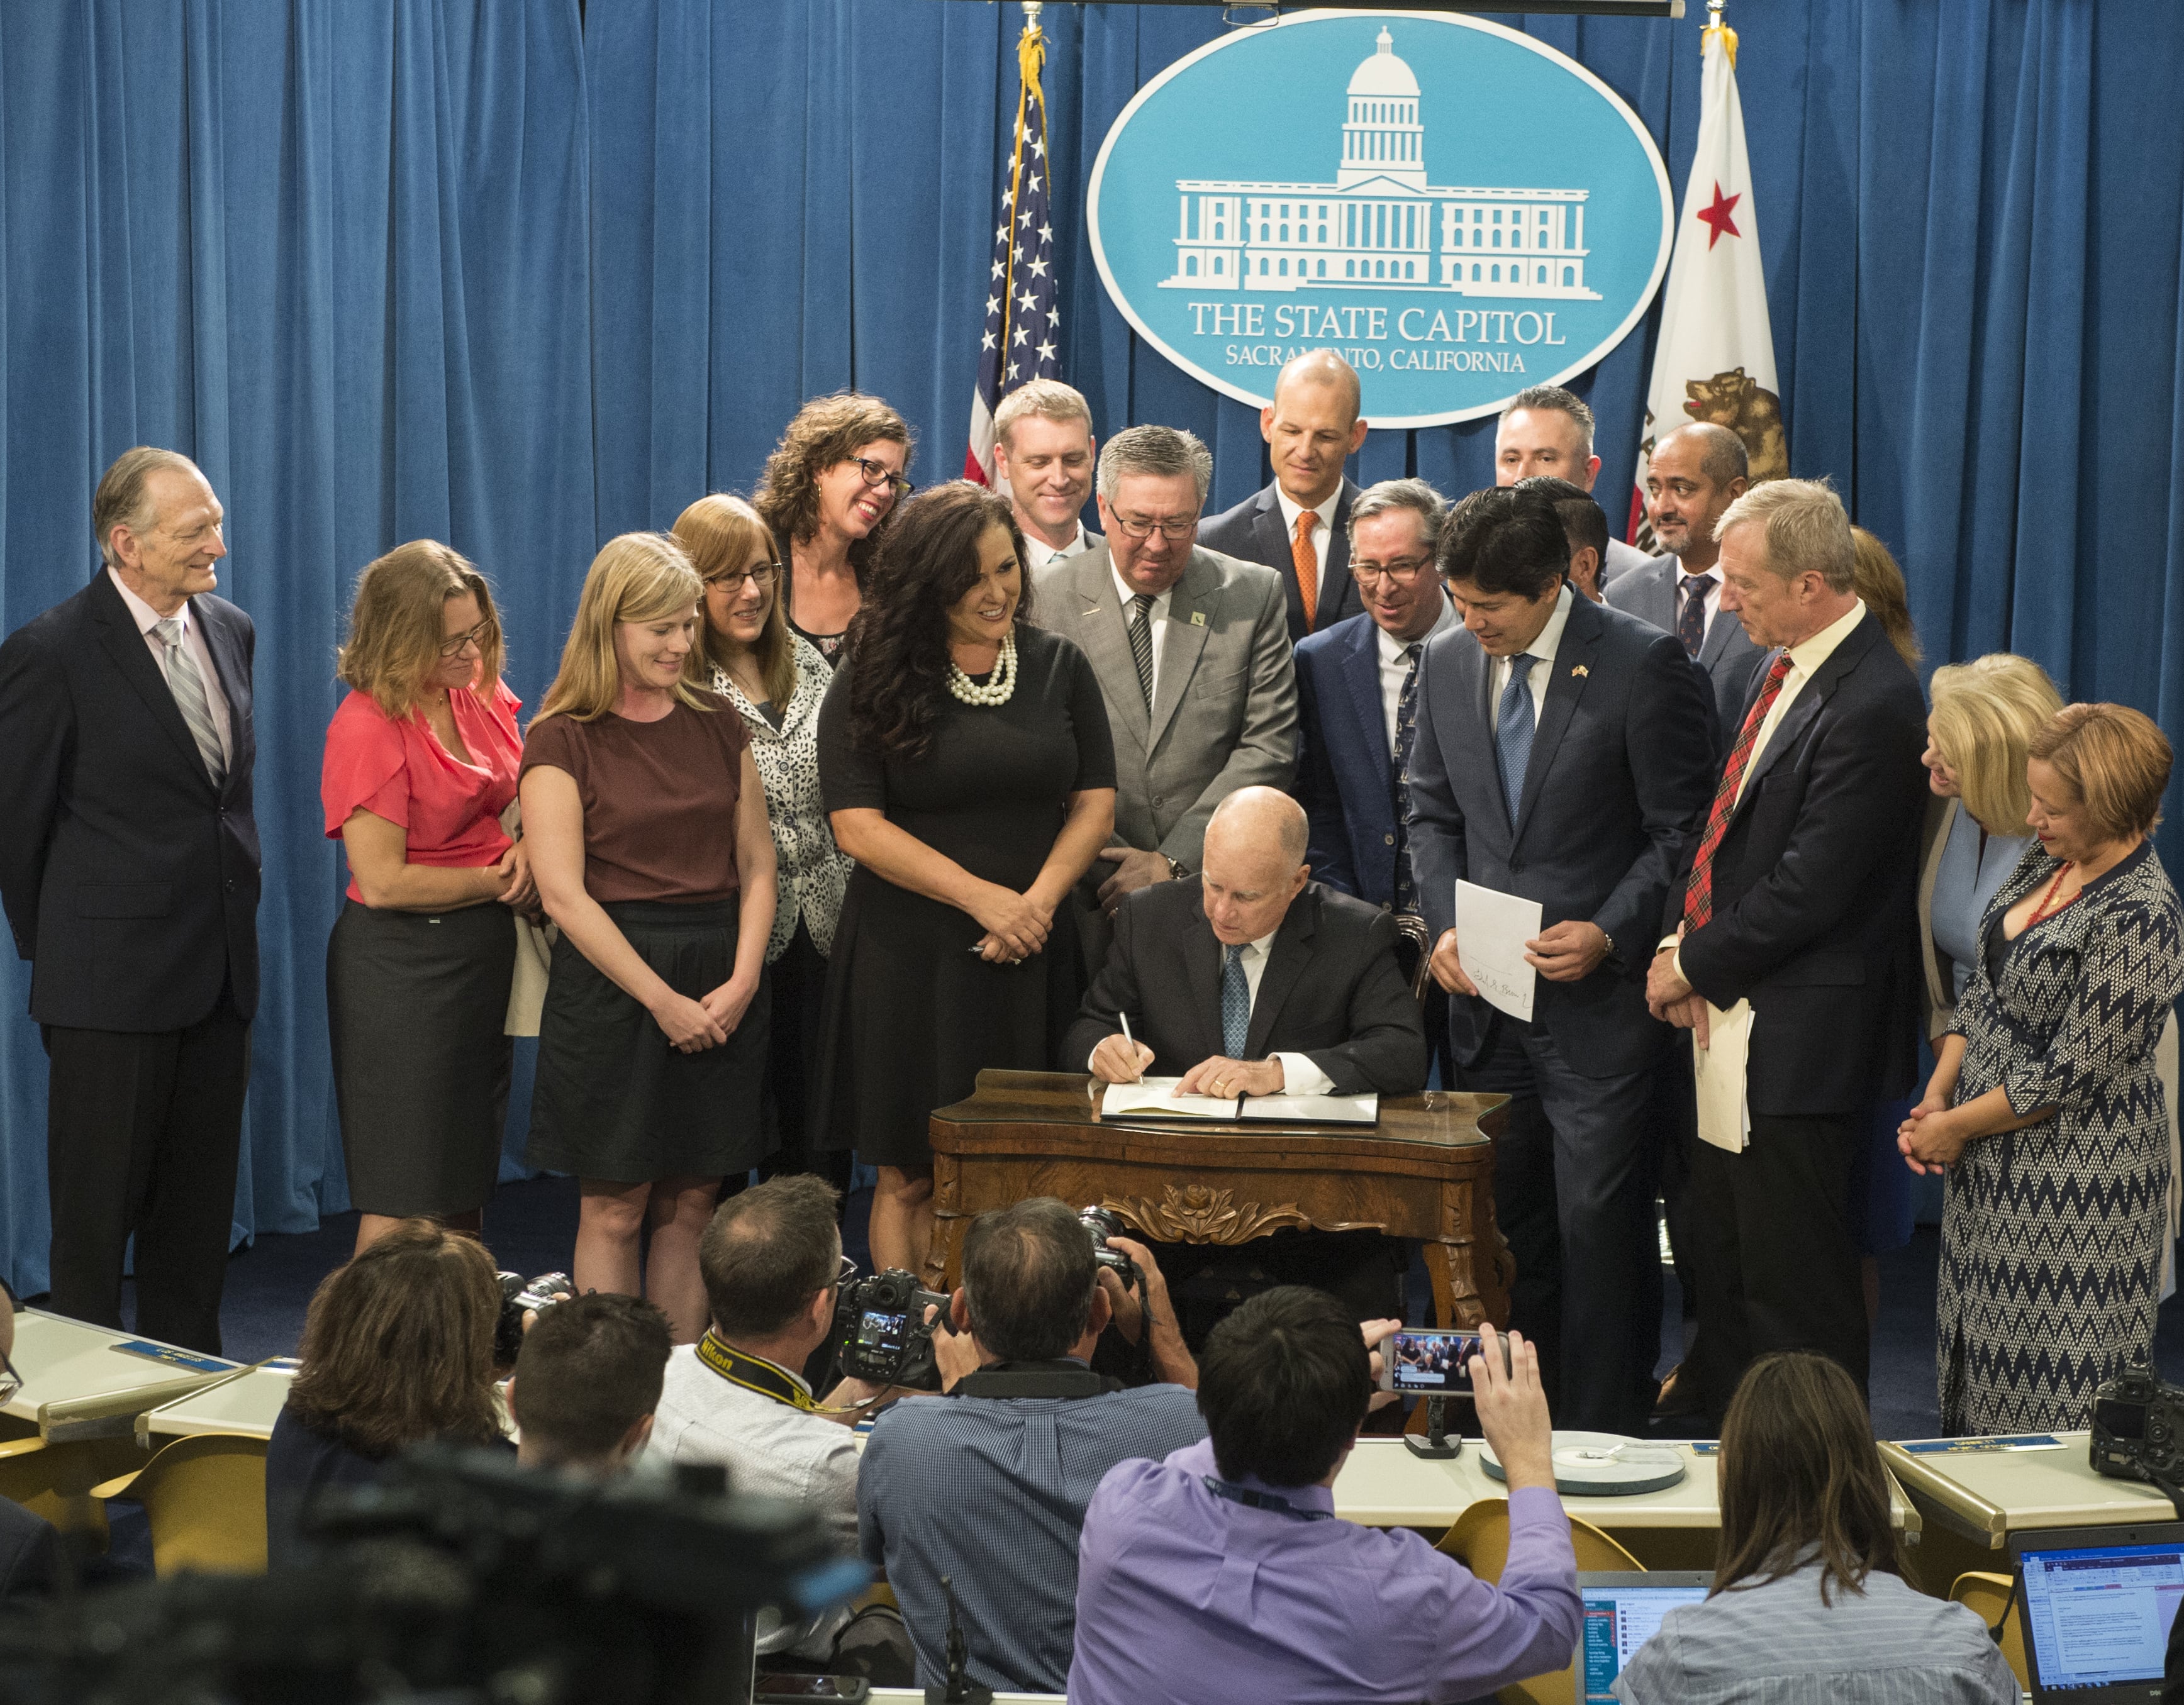 Governor Brown Signs 100 Percent Clean Electricity Bill, Issues Order Setting New Carbon Neutrality Goal